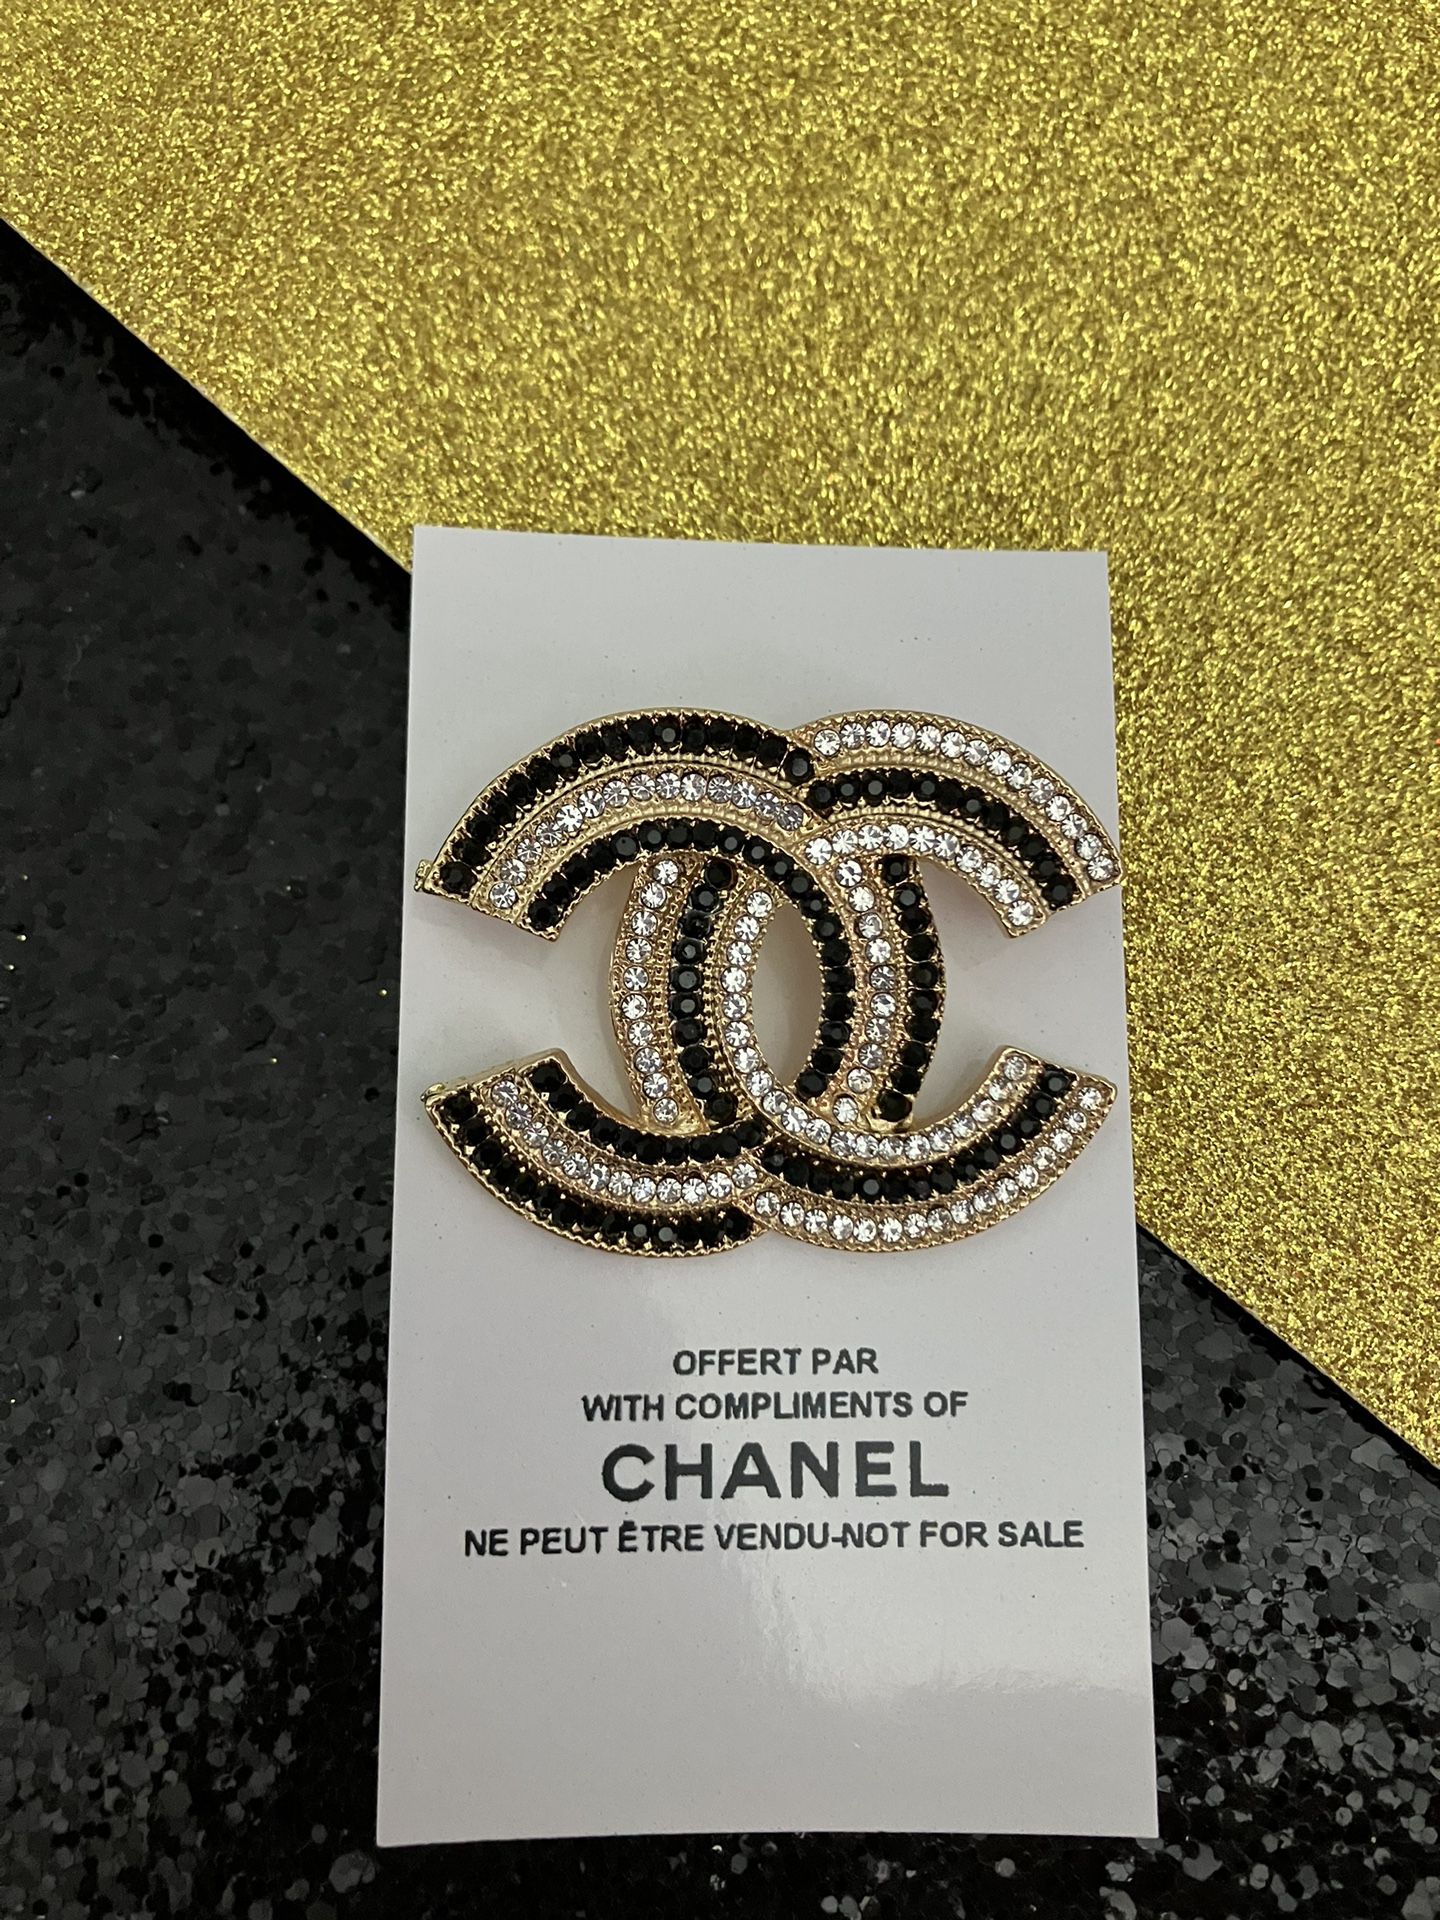 CC BROOCH for Sale in Tampa, FL - OfferUp